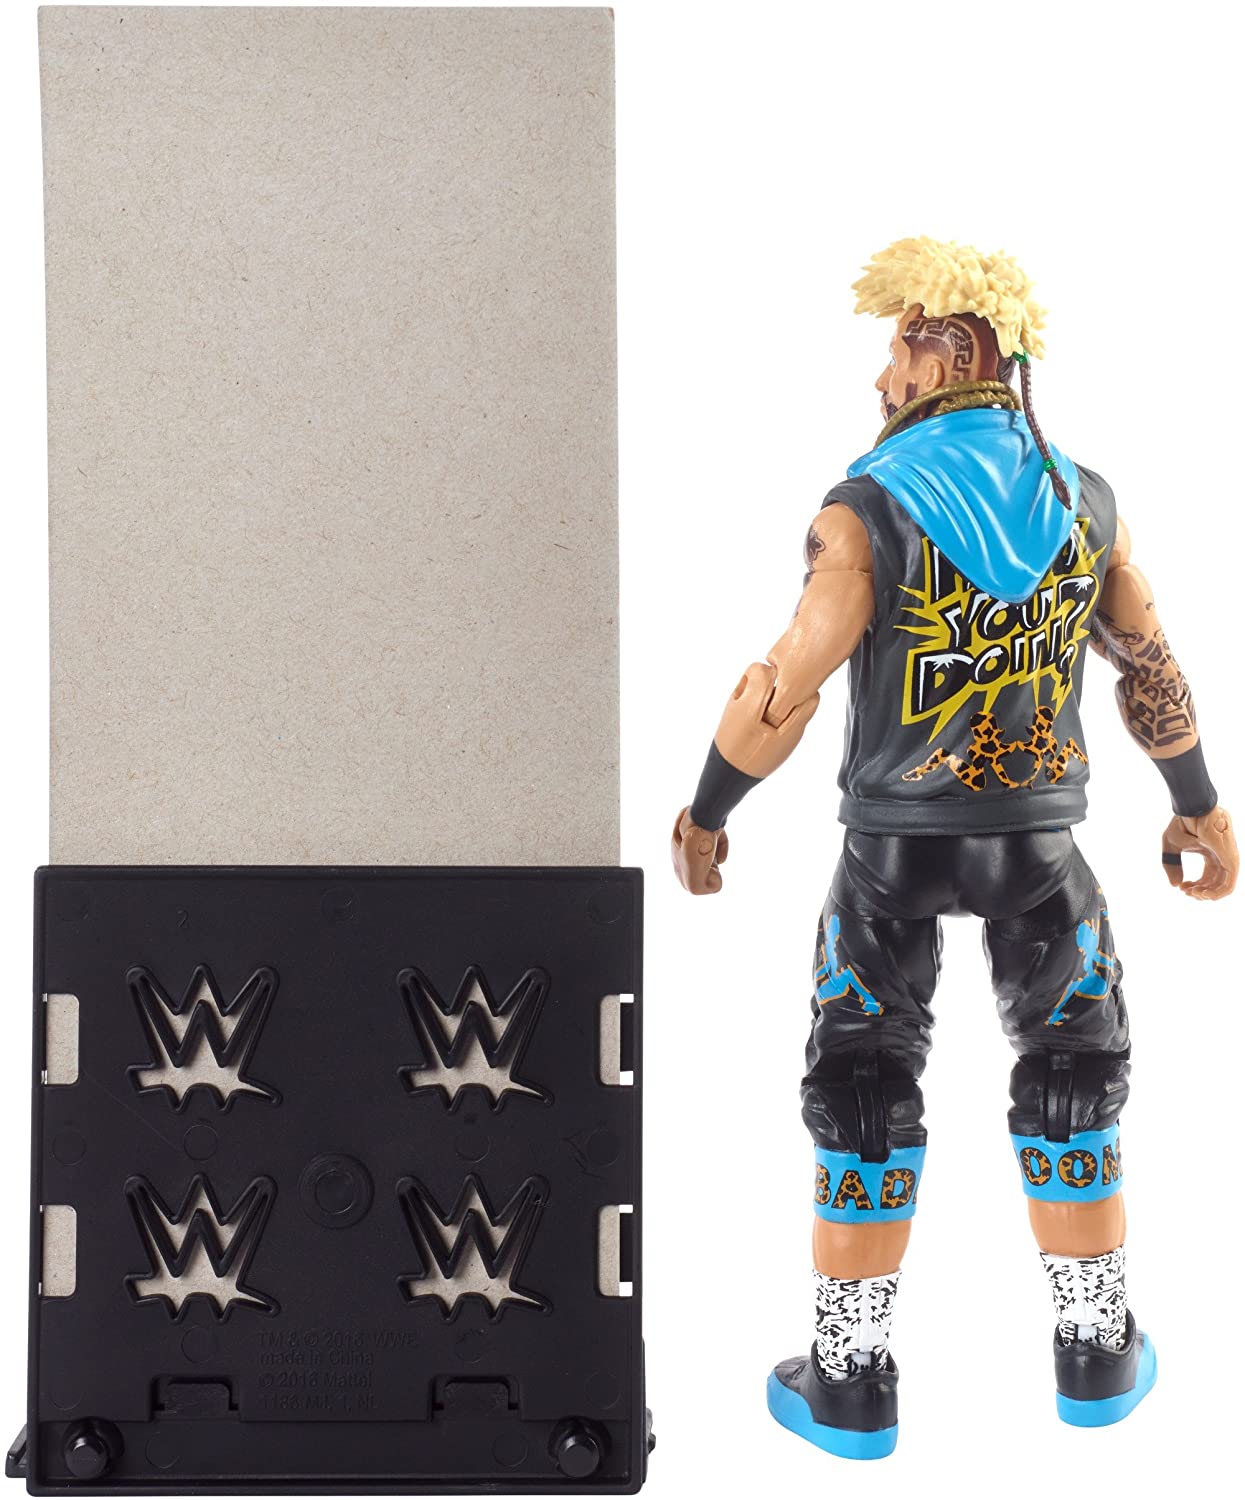 2017 WWE Mattel Elite Collection Series 49 Enzo Amore